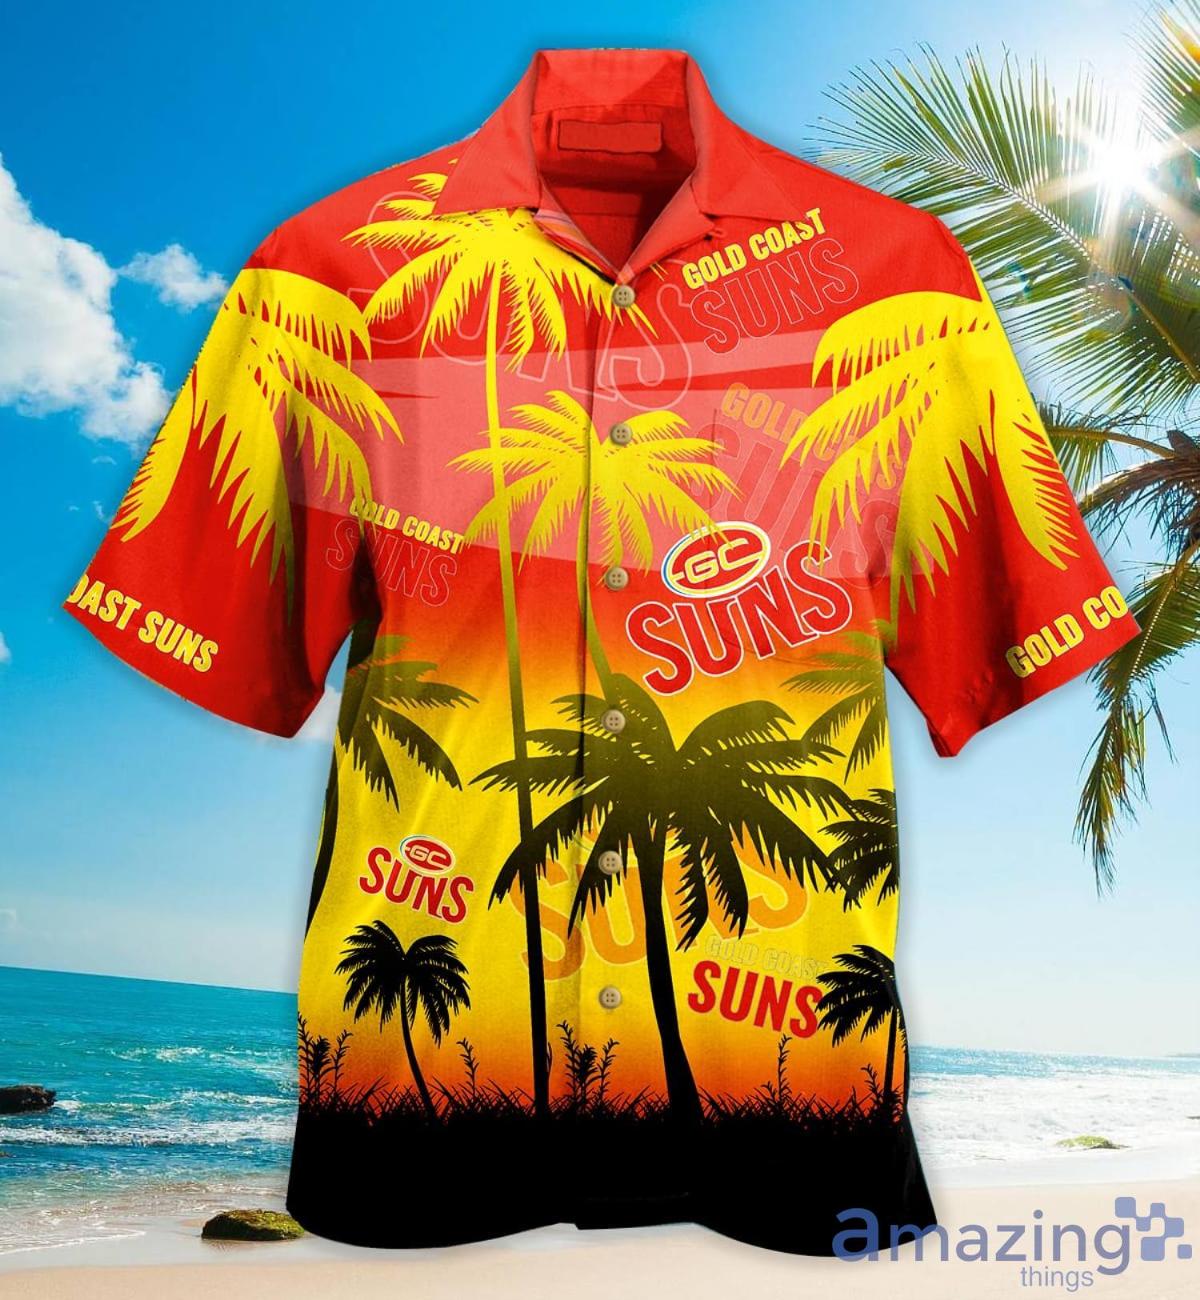 Afl Gold Coast Suns Multi Logo White Red Tropical Hawaiian Shirt Best Gift For Fans